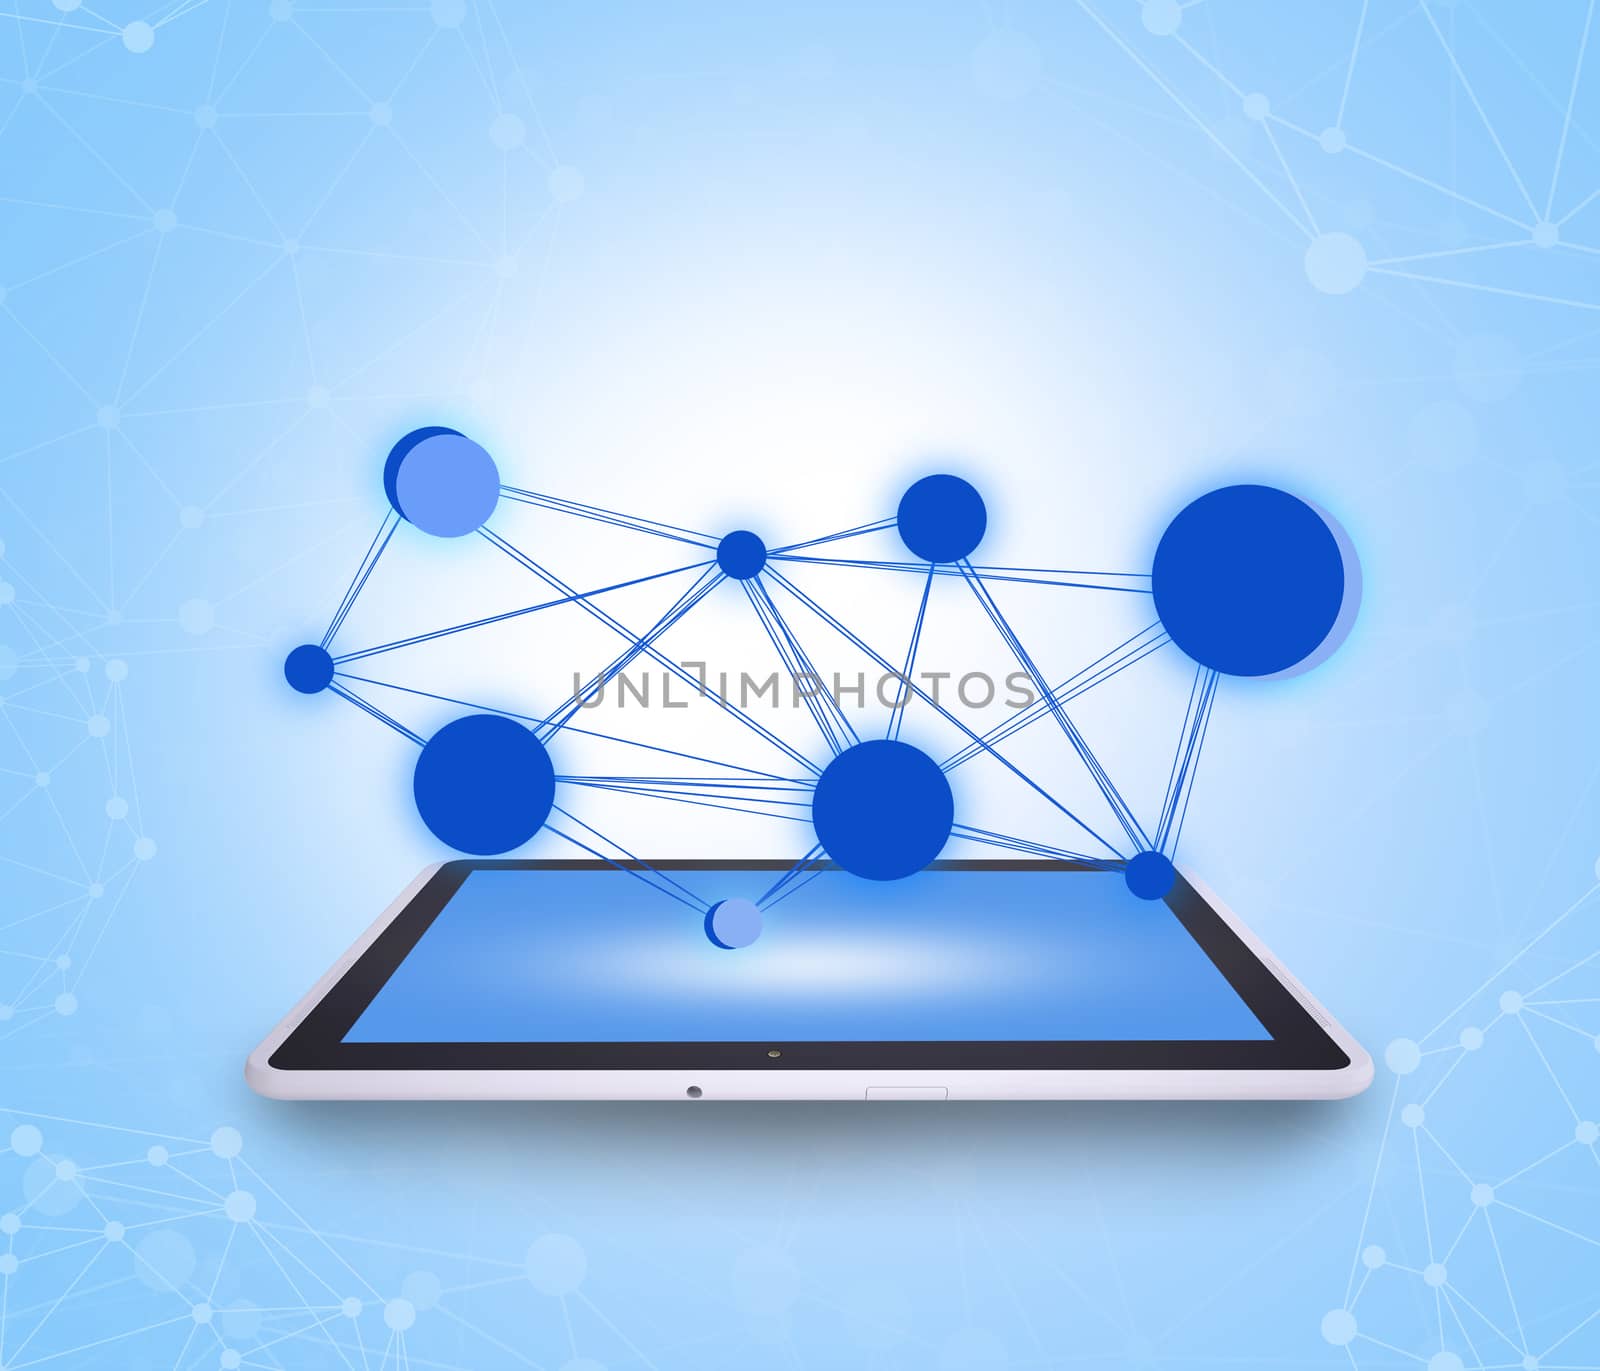 Tablet on abstract blue background with circles and molecules